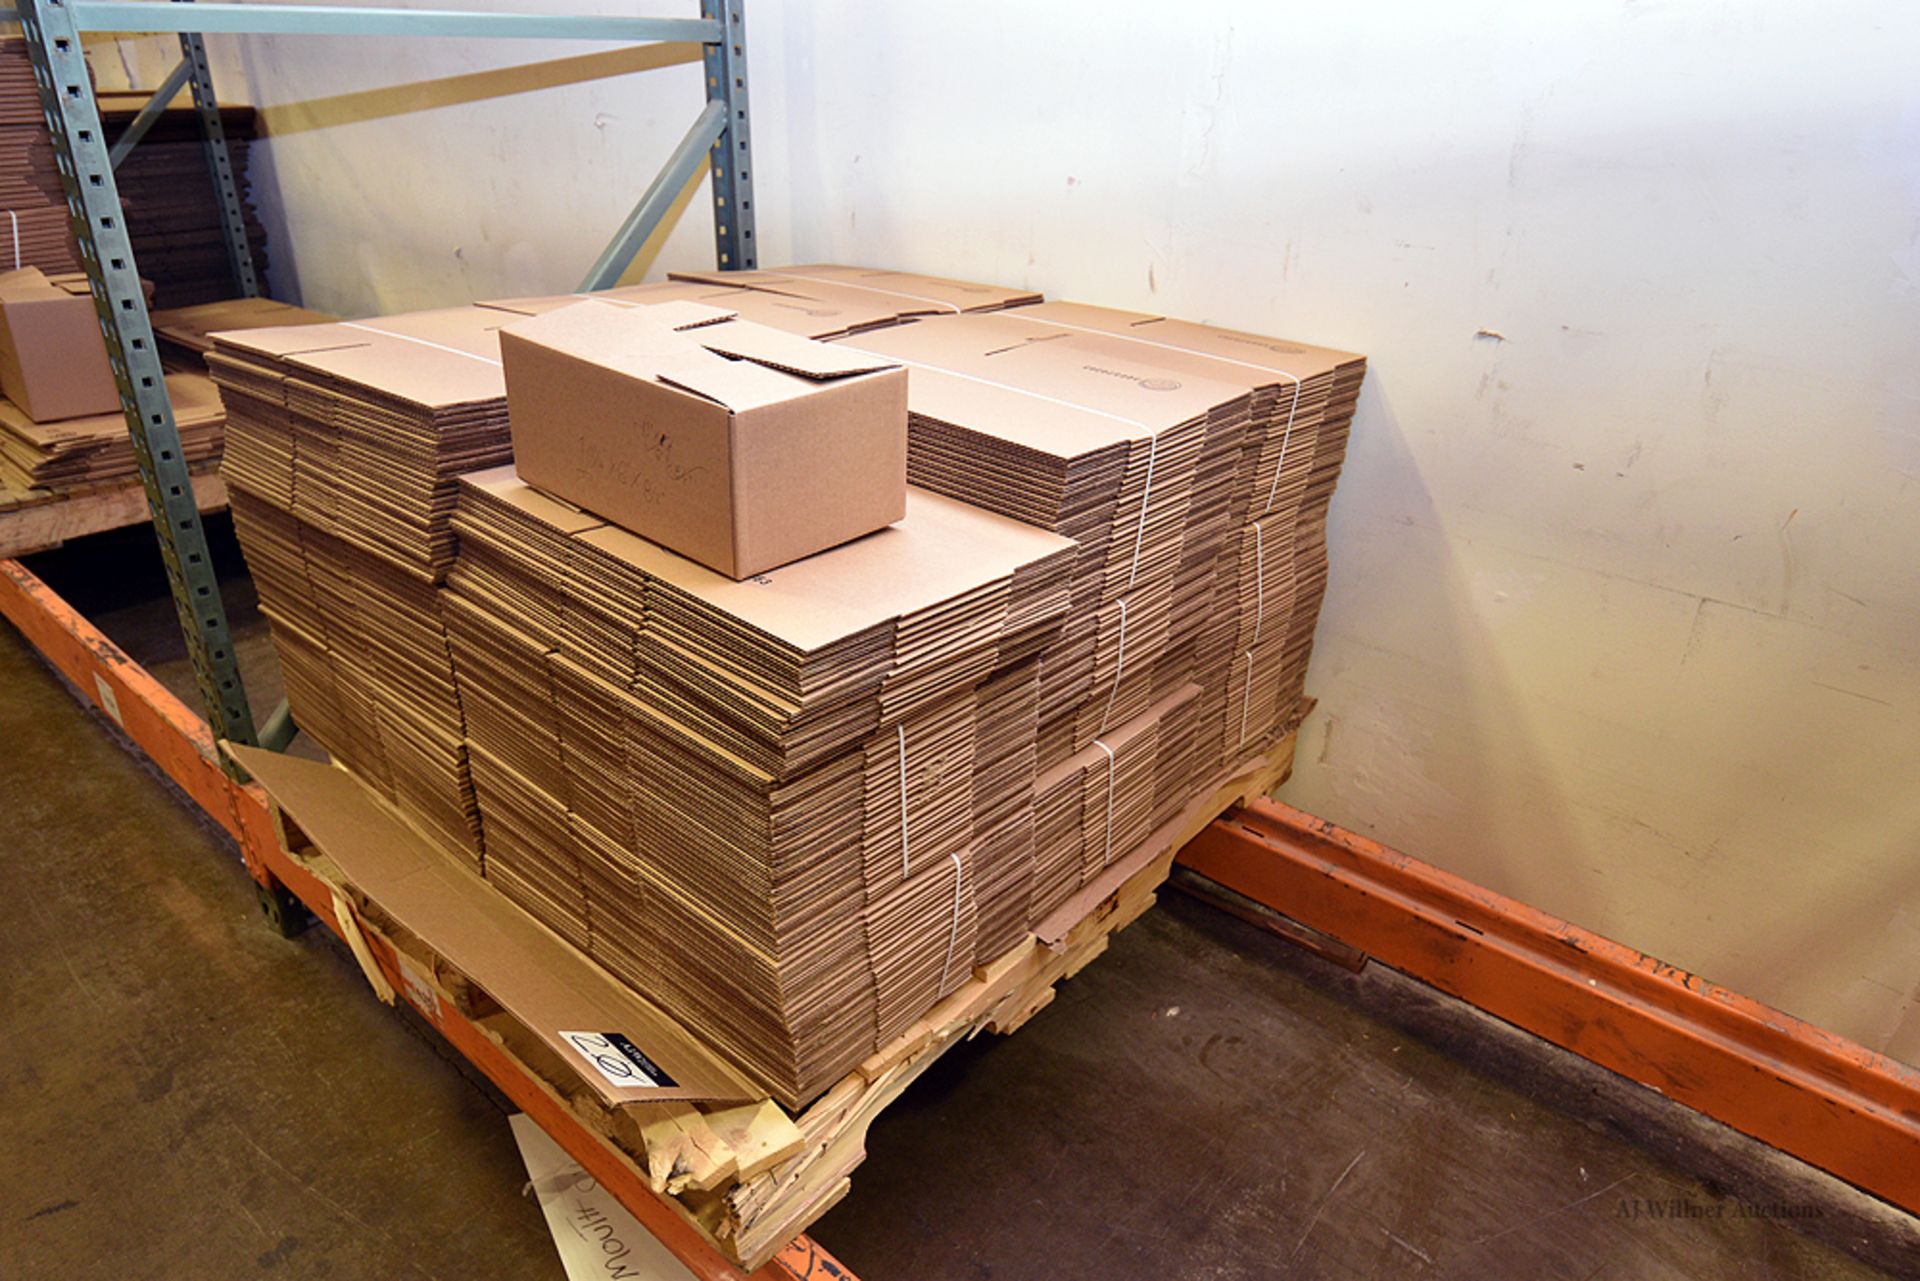 Pallet of Currugrated Cardboard Boxes 13-1/4"L 8-1/2"W 6"D - Image 2 of 2